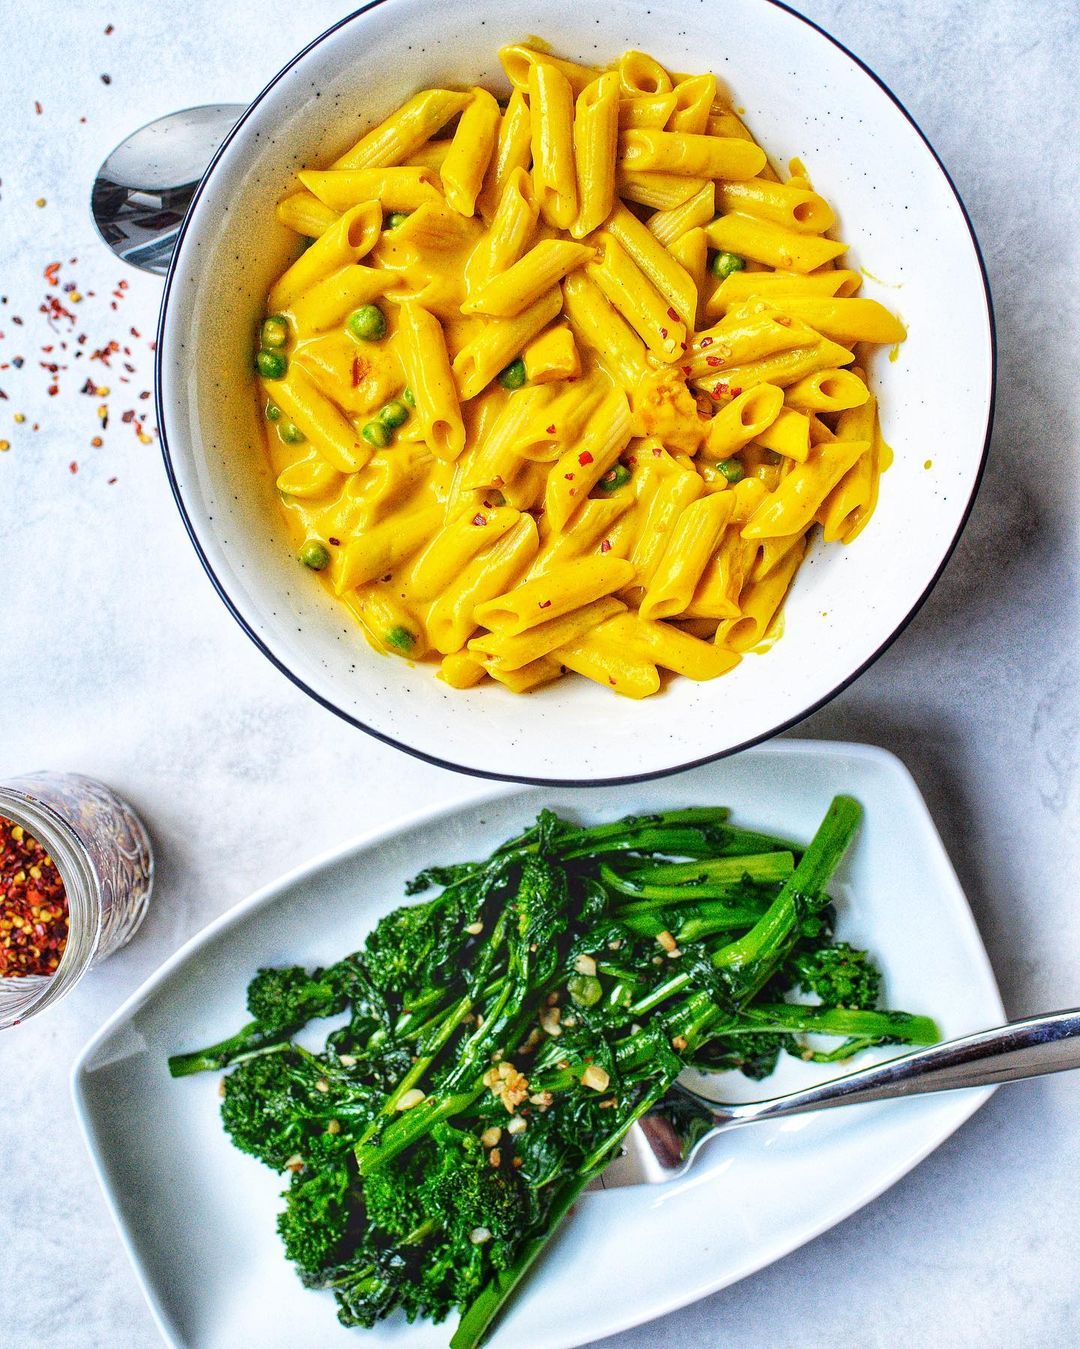 My Curried Butternut Squash Mac and Cheese with Garlicky Rapini